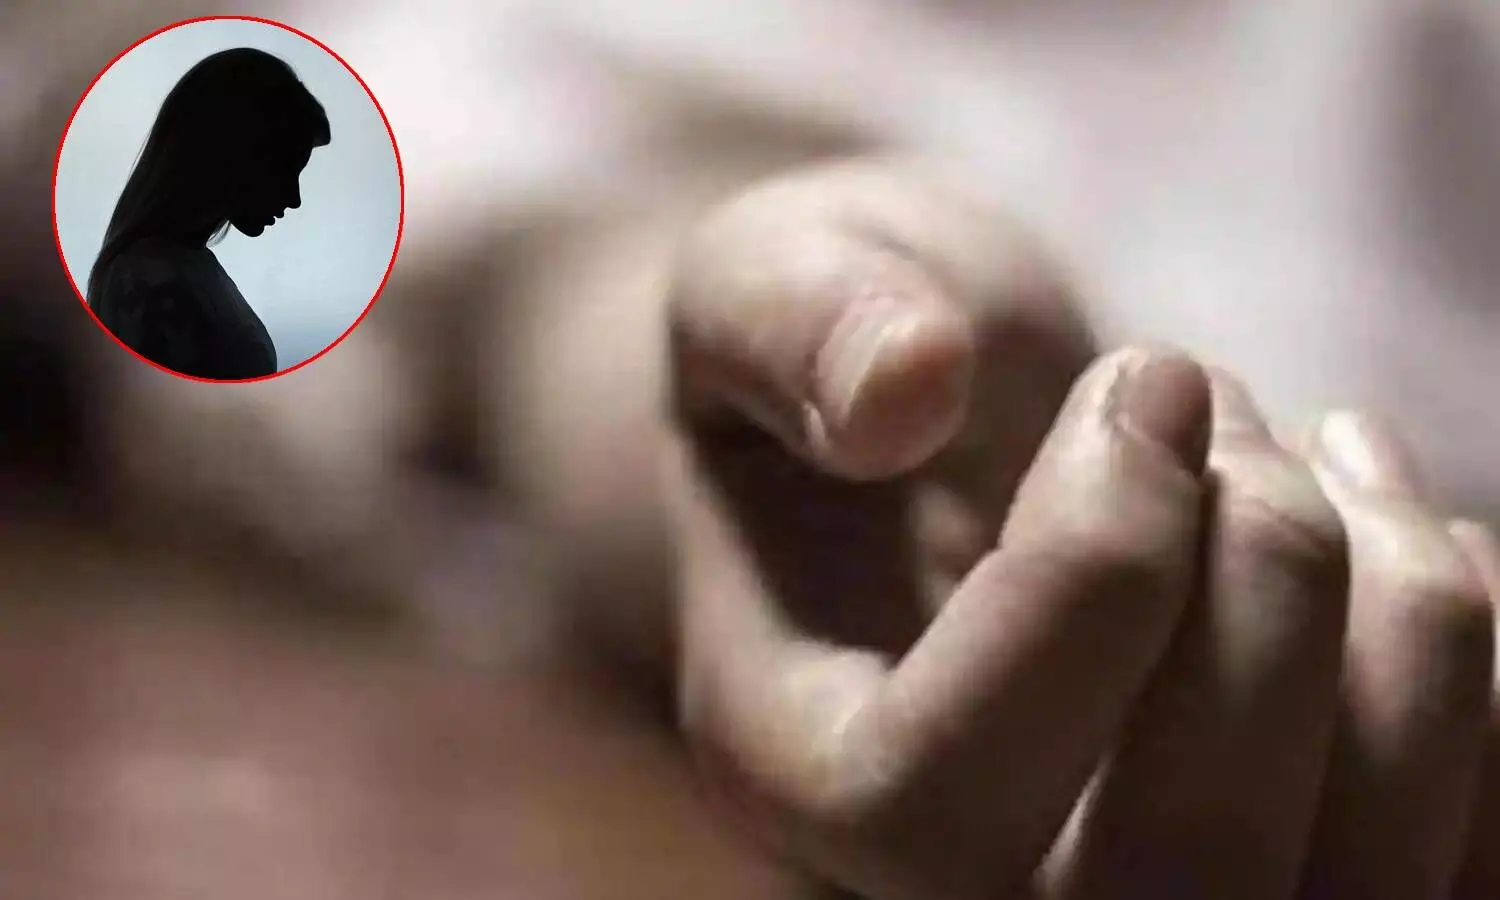 11 Year old dies by suicide after argument with neighbour